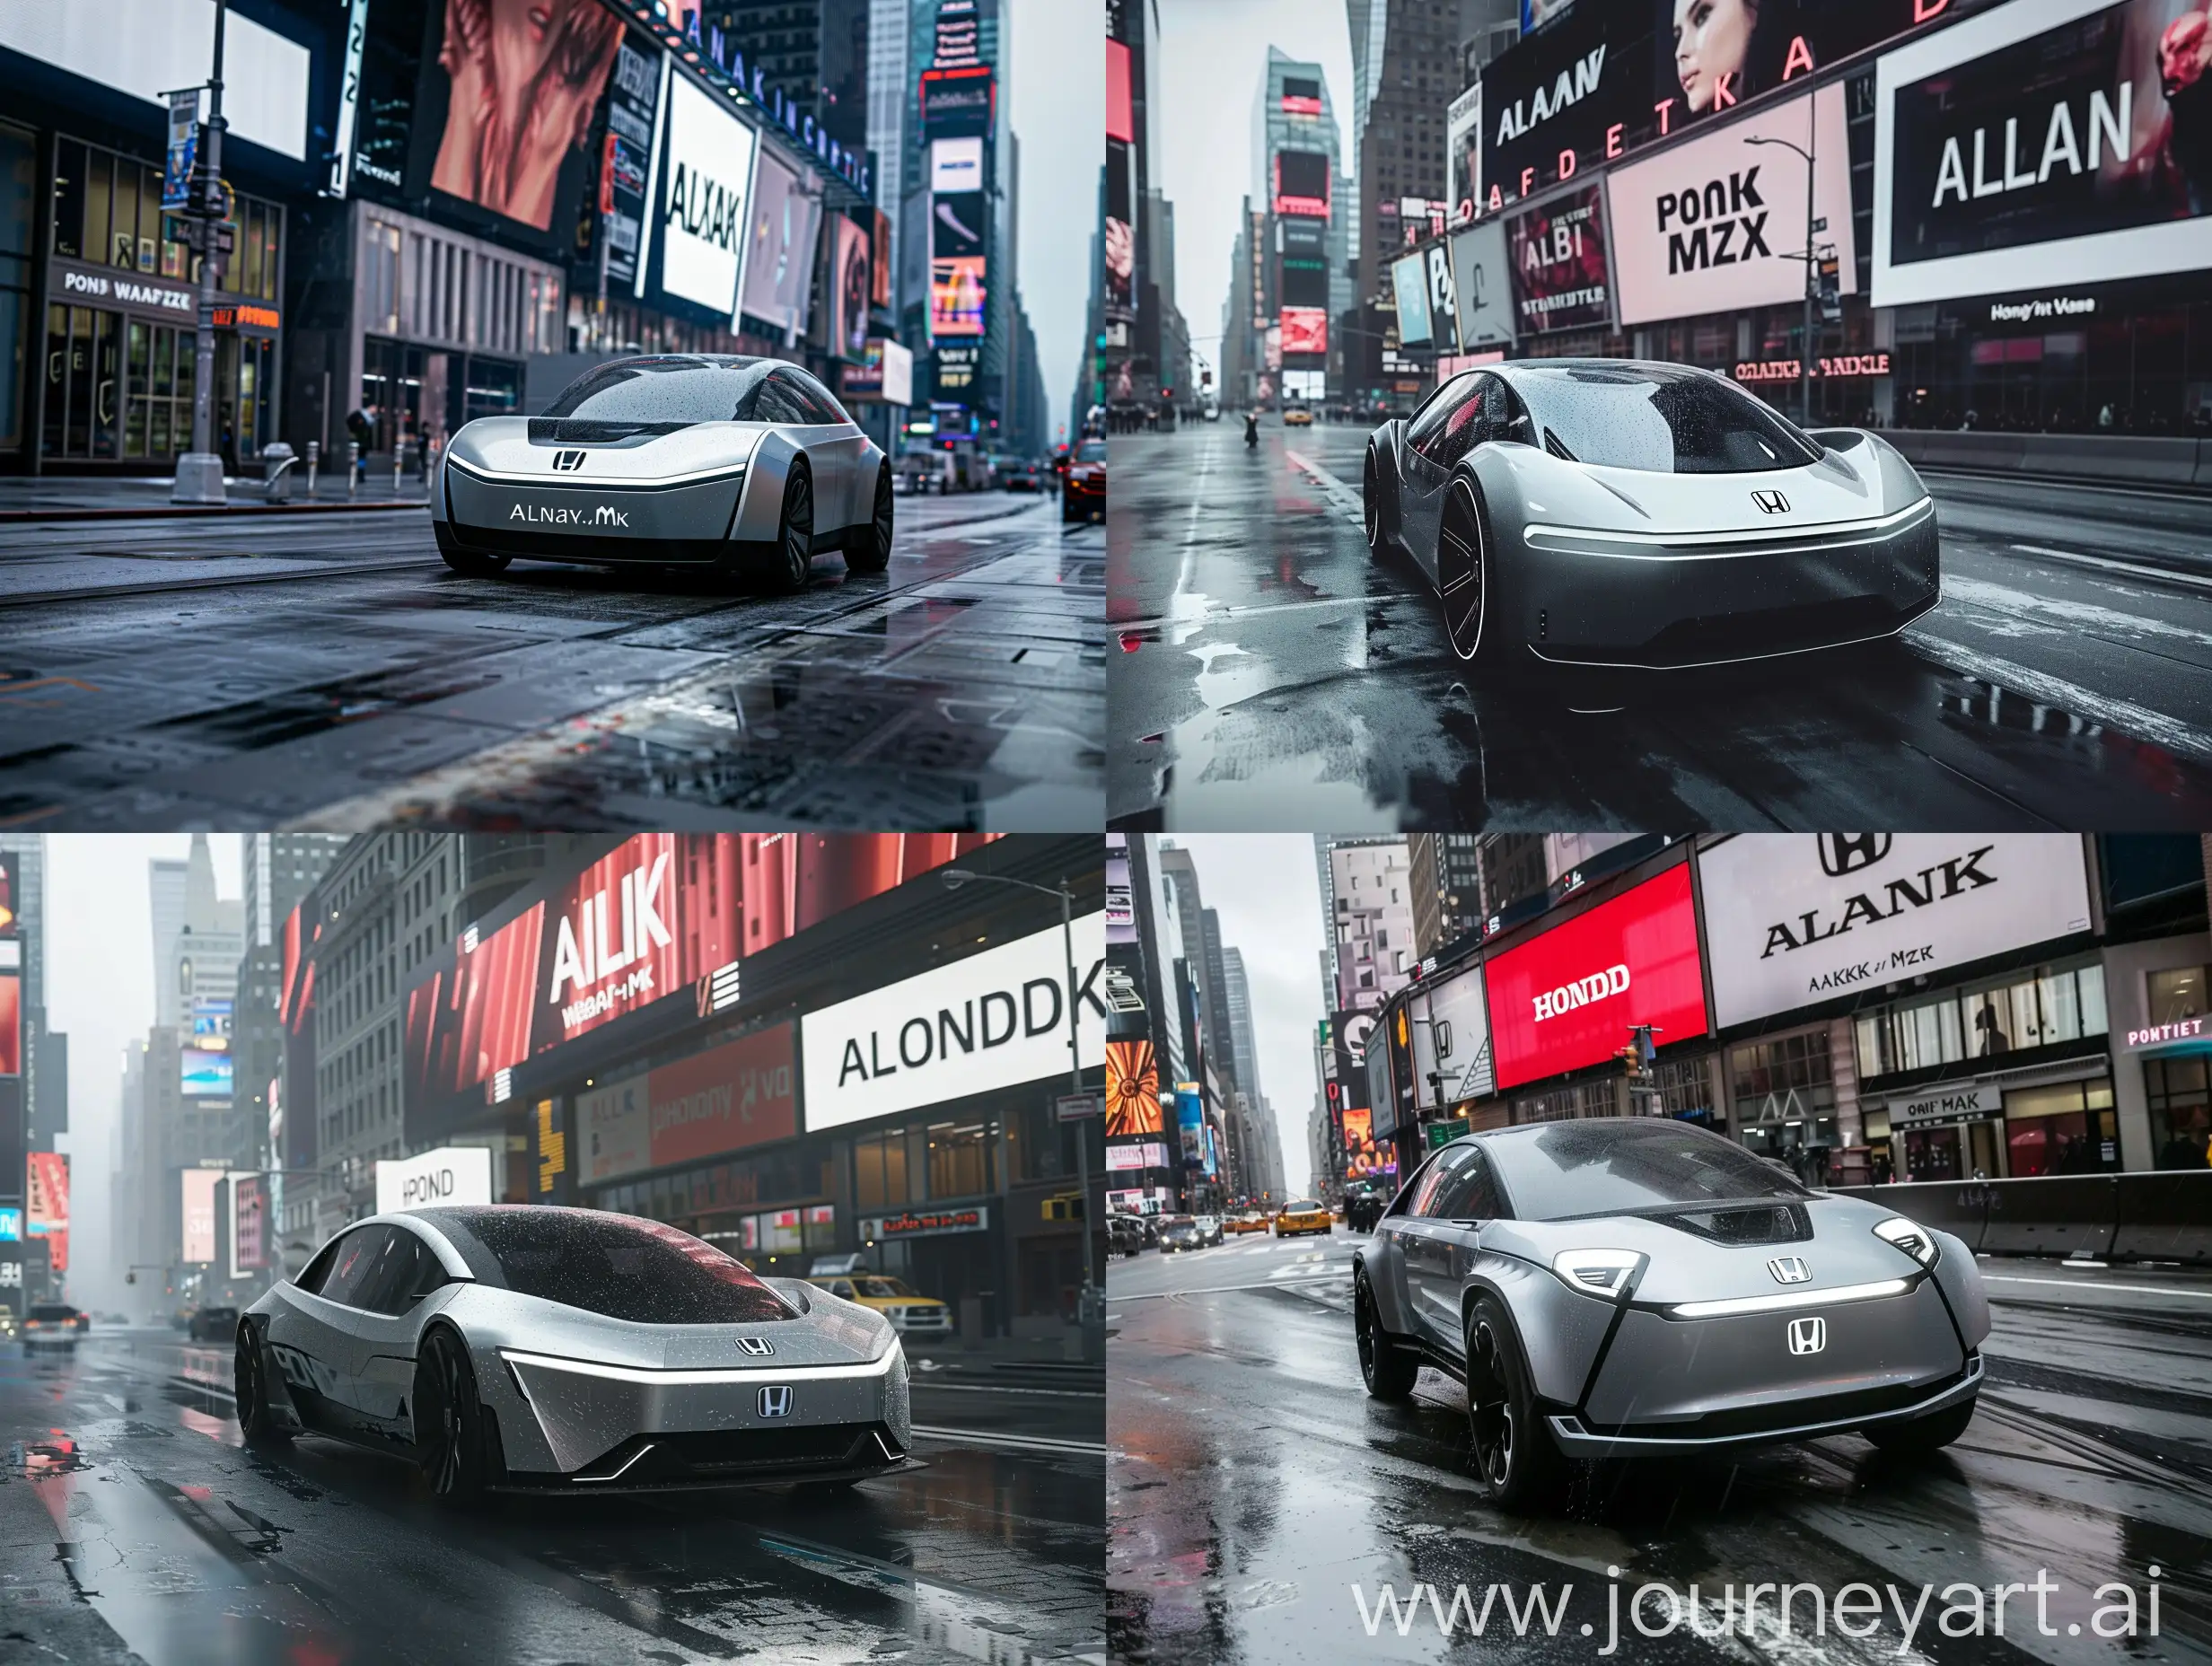 a raw photo showcasing the full Dutch Angle of a silver autonomous electric futuristic Honda vehicle driving on the street, natural lighting, cinematic, photograph, environment, new york city, photo, day time, rainy weather, atmospheric, custom buildings, infrastructures the photo should look like it was taken by a processional camera, the text should say 'alone' an underneath the alone text should say 'phonk/wave mix', the font style should be cinematic an futuristic to match the vibe, the whole text itself should be spelled perfectly to precise, the vehicle design looks sci fi, the vibe of the photo should be moody, billboards, the photo should be detailed to precise 4k,